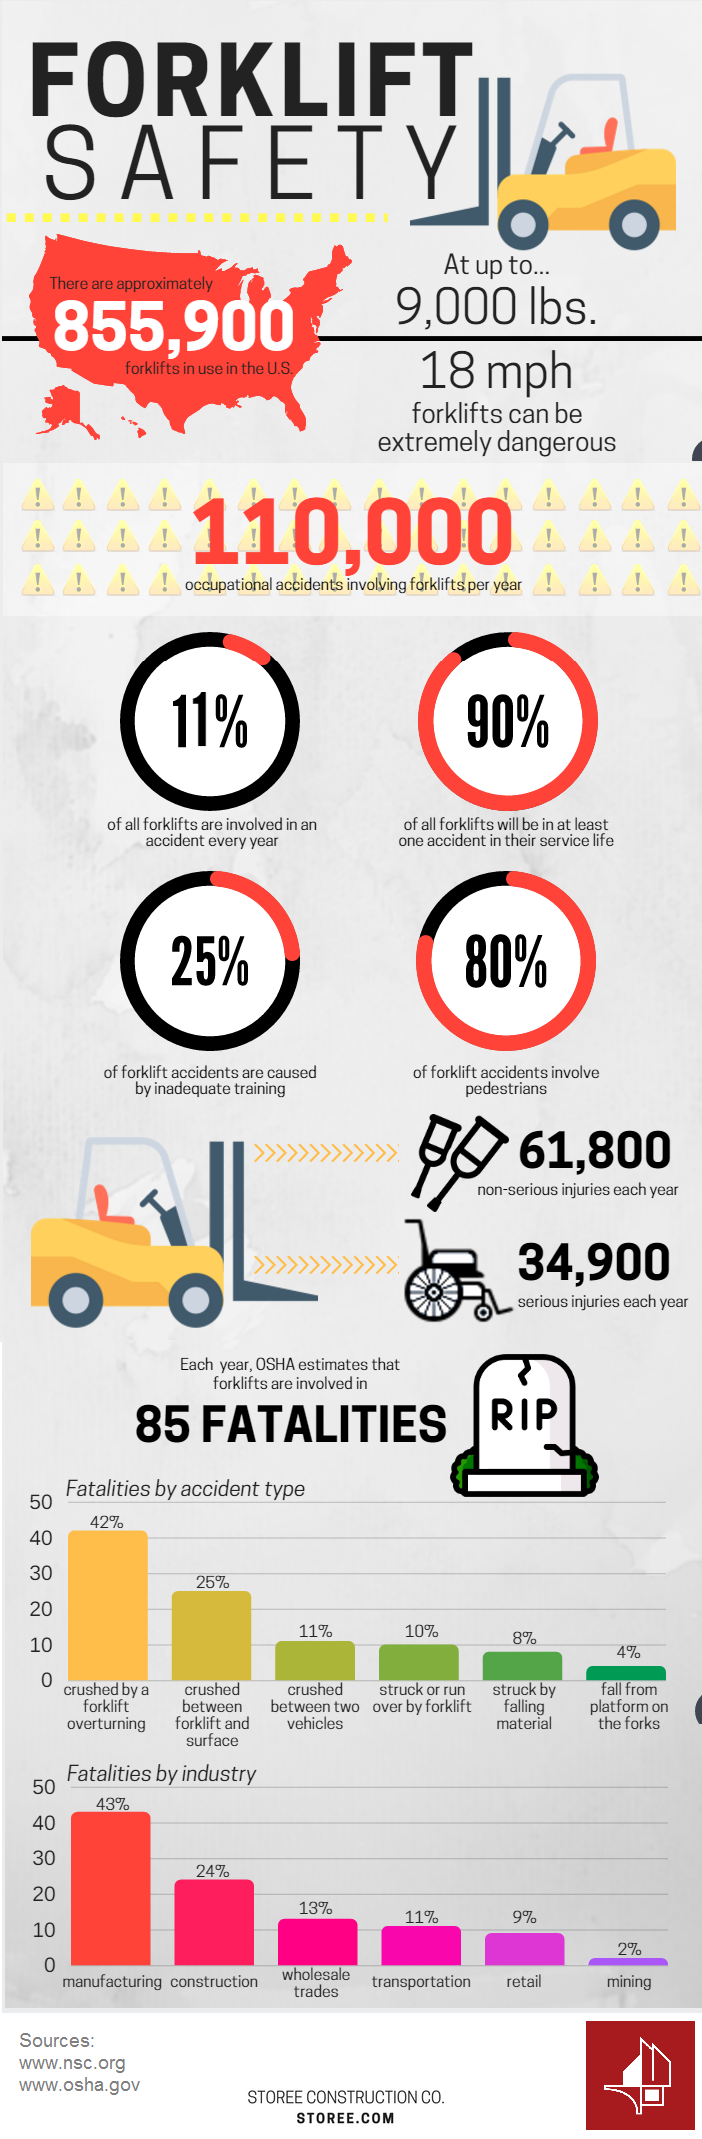 Forklift Safety in the Workplace | Storee Construction Co.